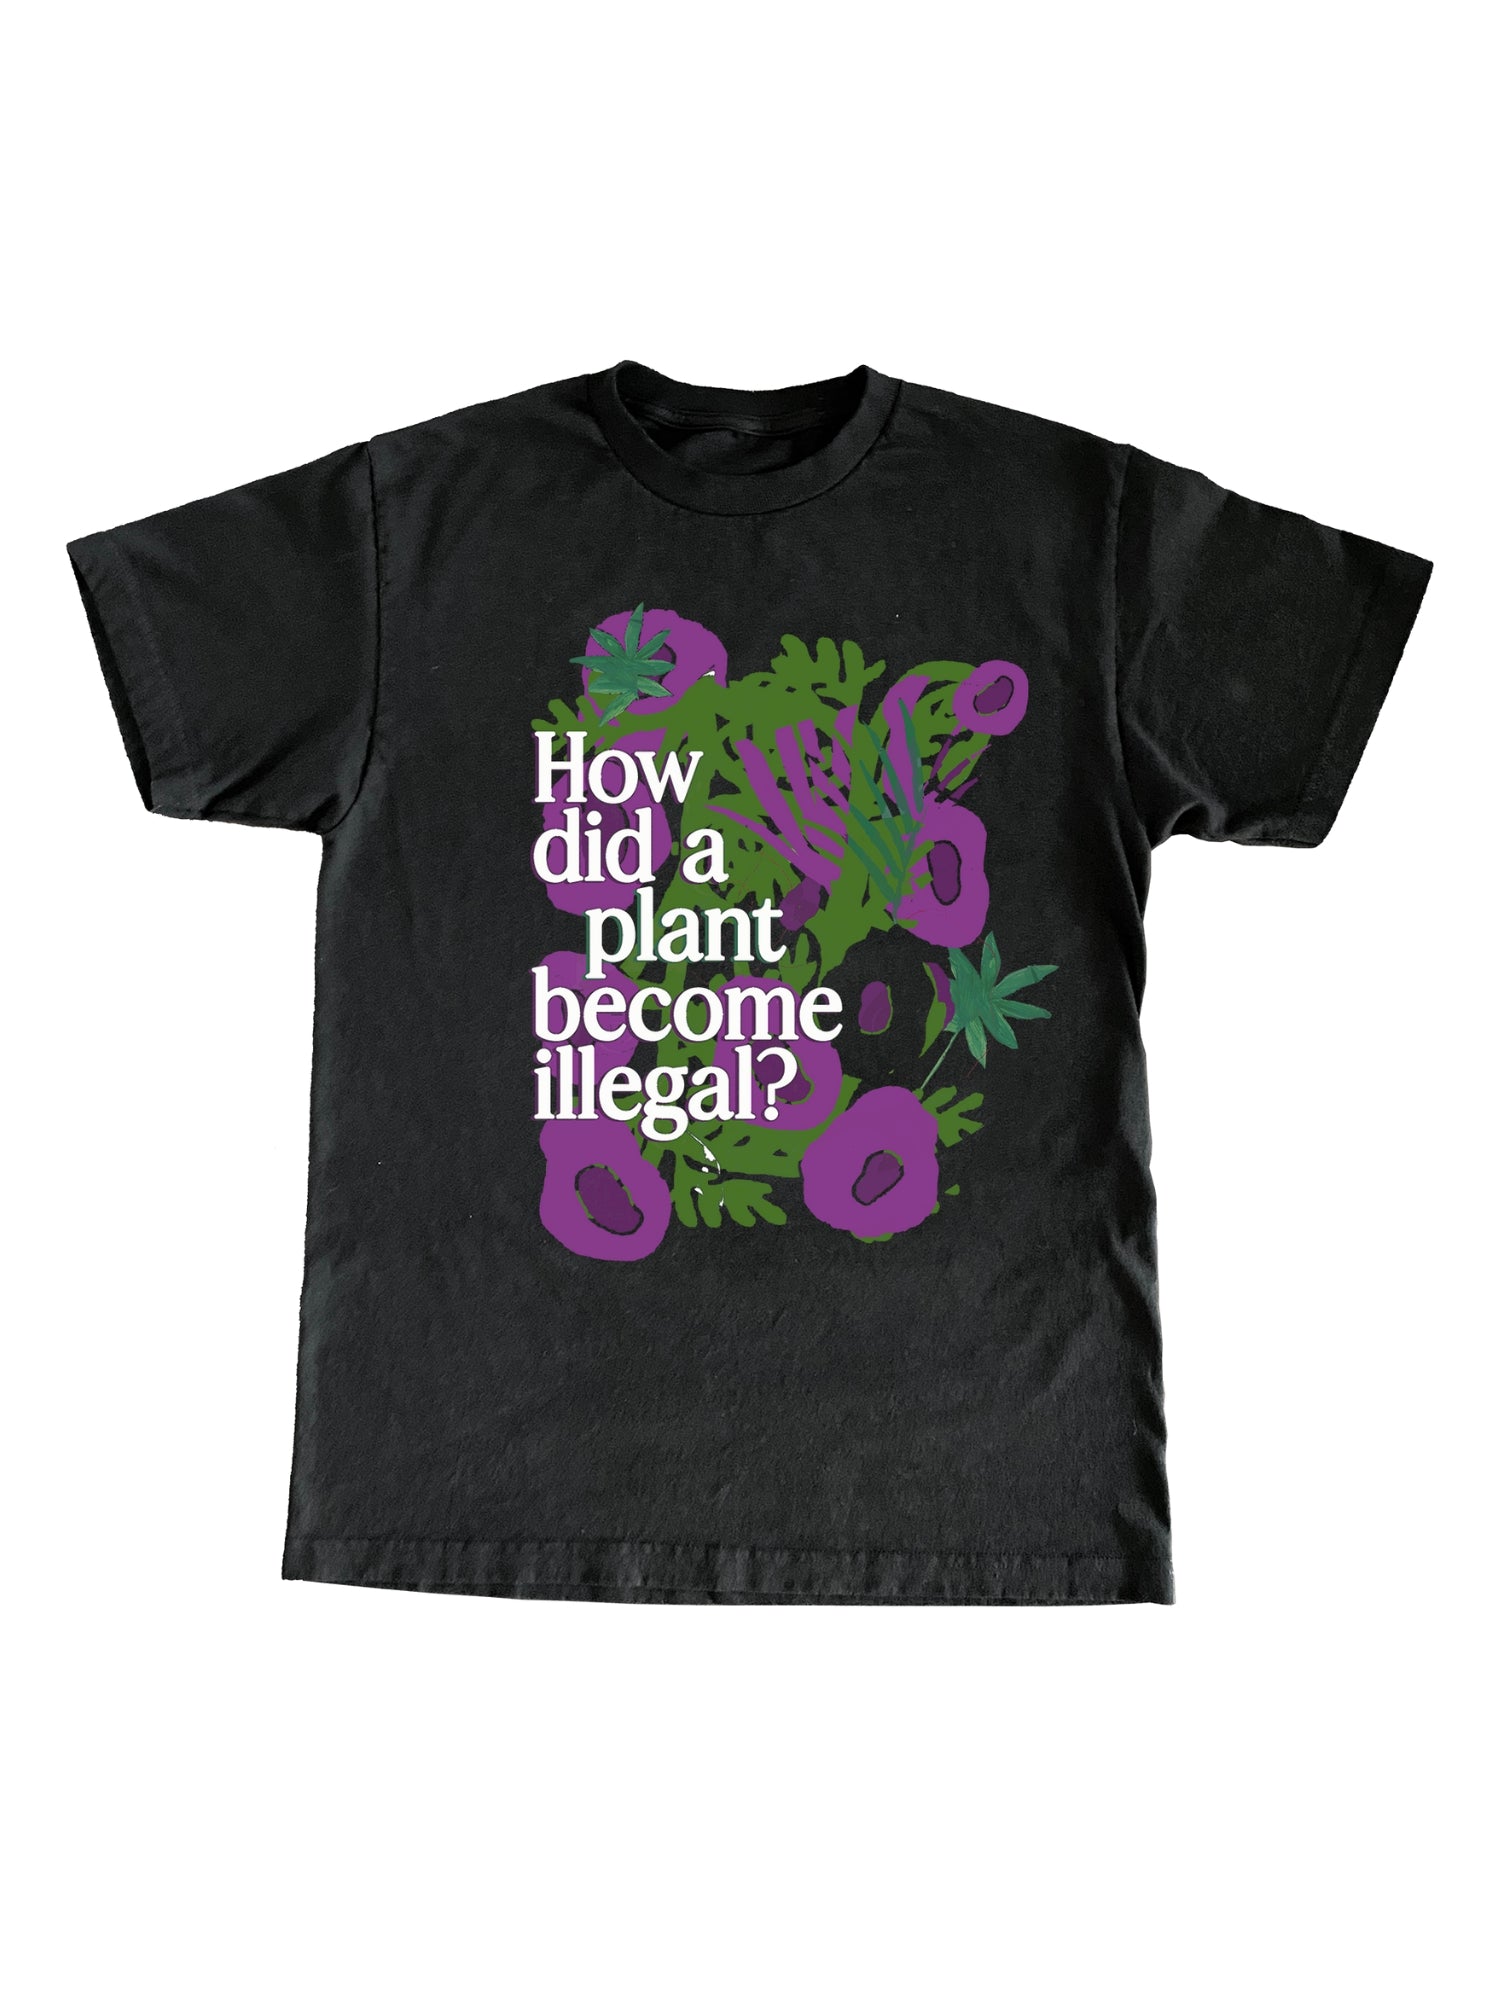 How Did a Plant Become Illegal? - Black